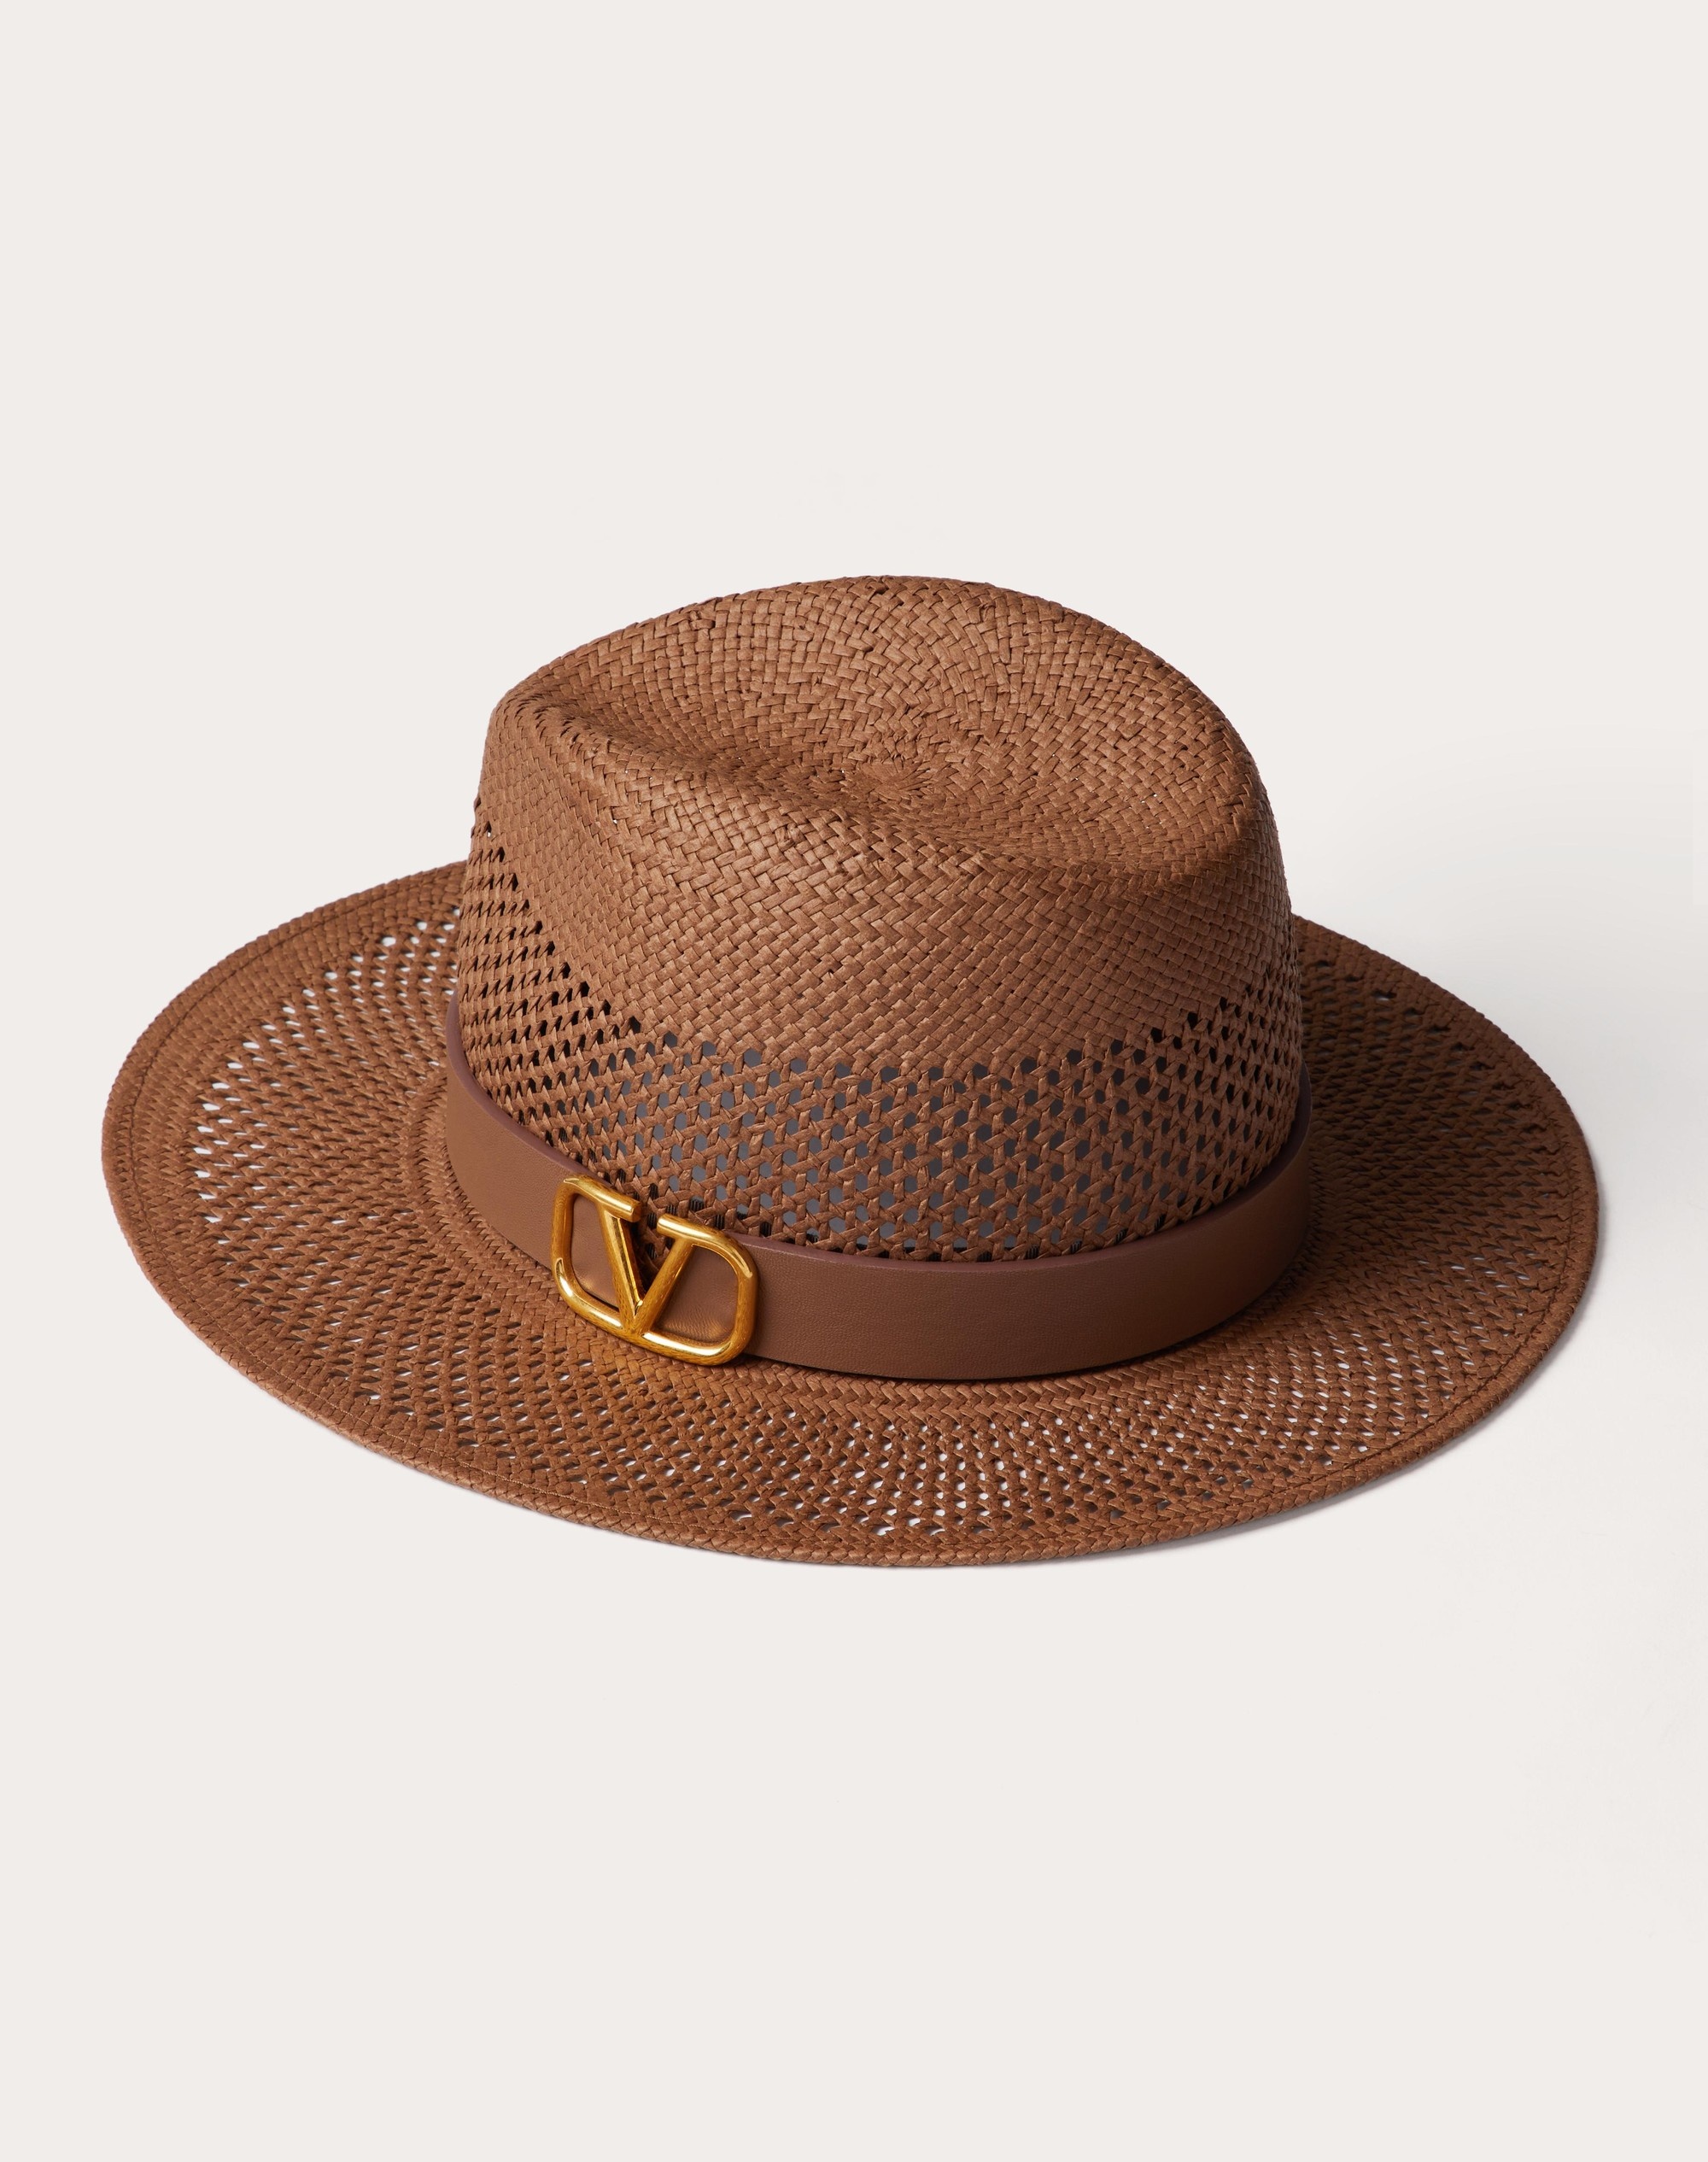 TEXTILE PAPER AND LEATHER VLOGO SIGNATURE FEDORA HAT - 3